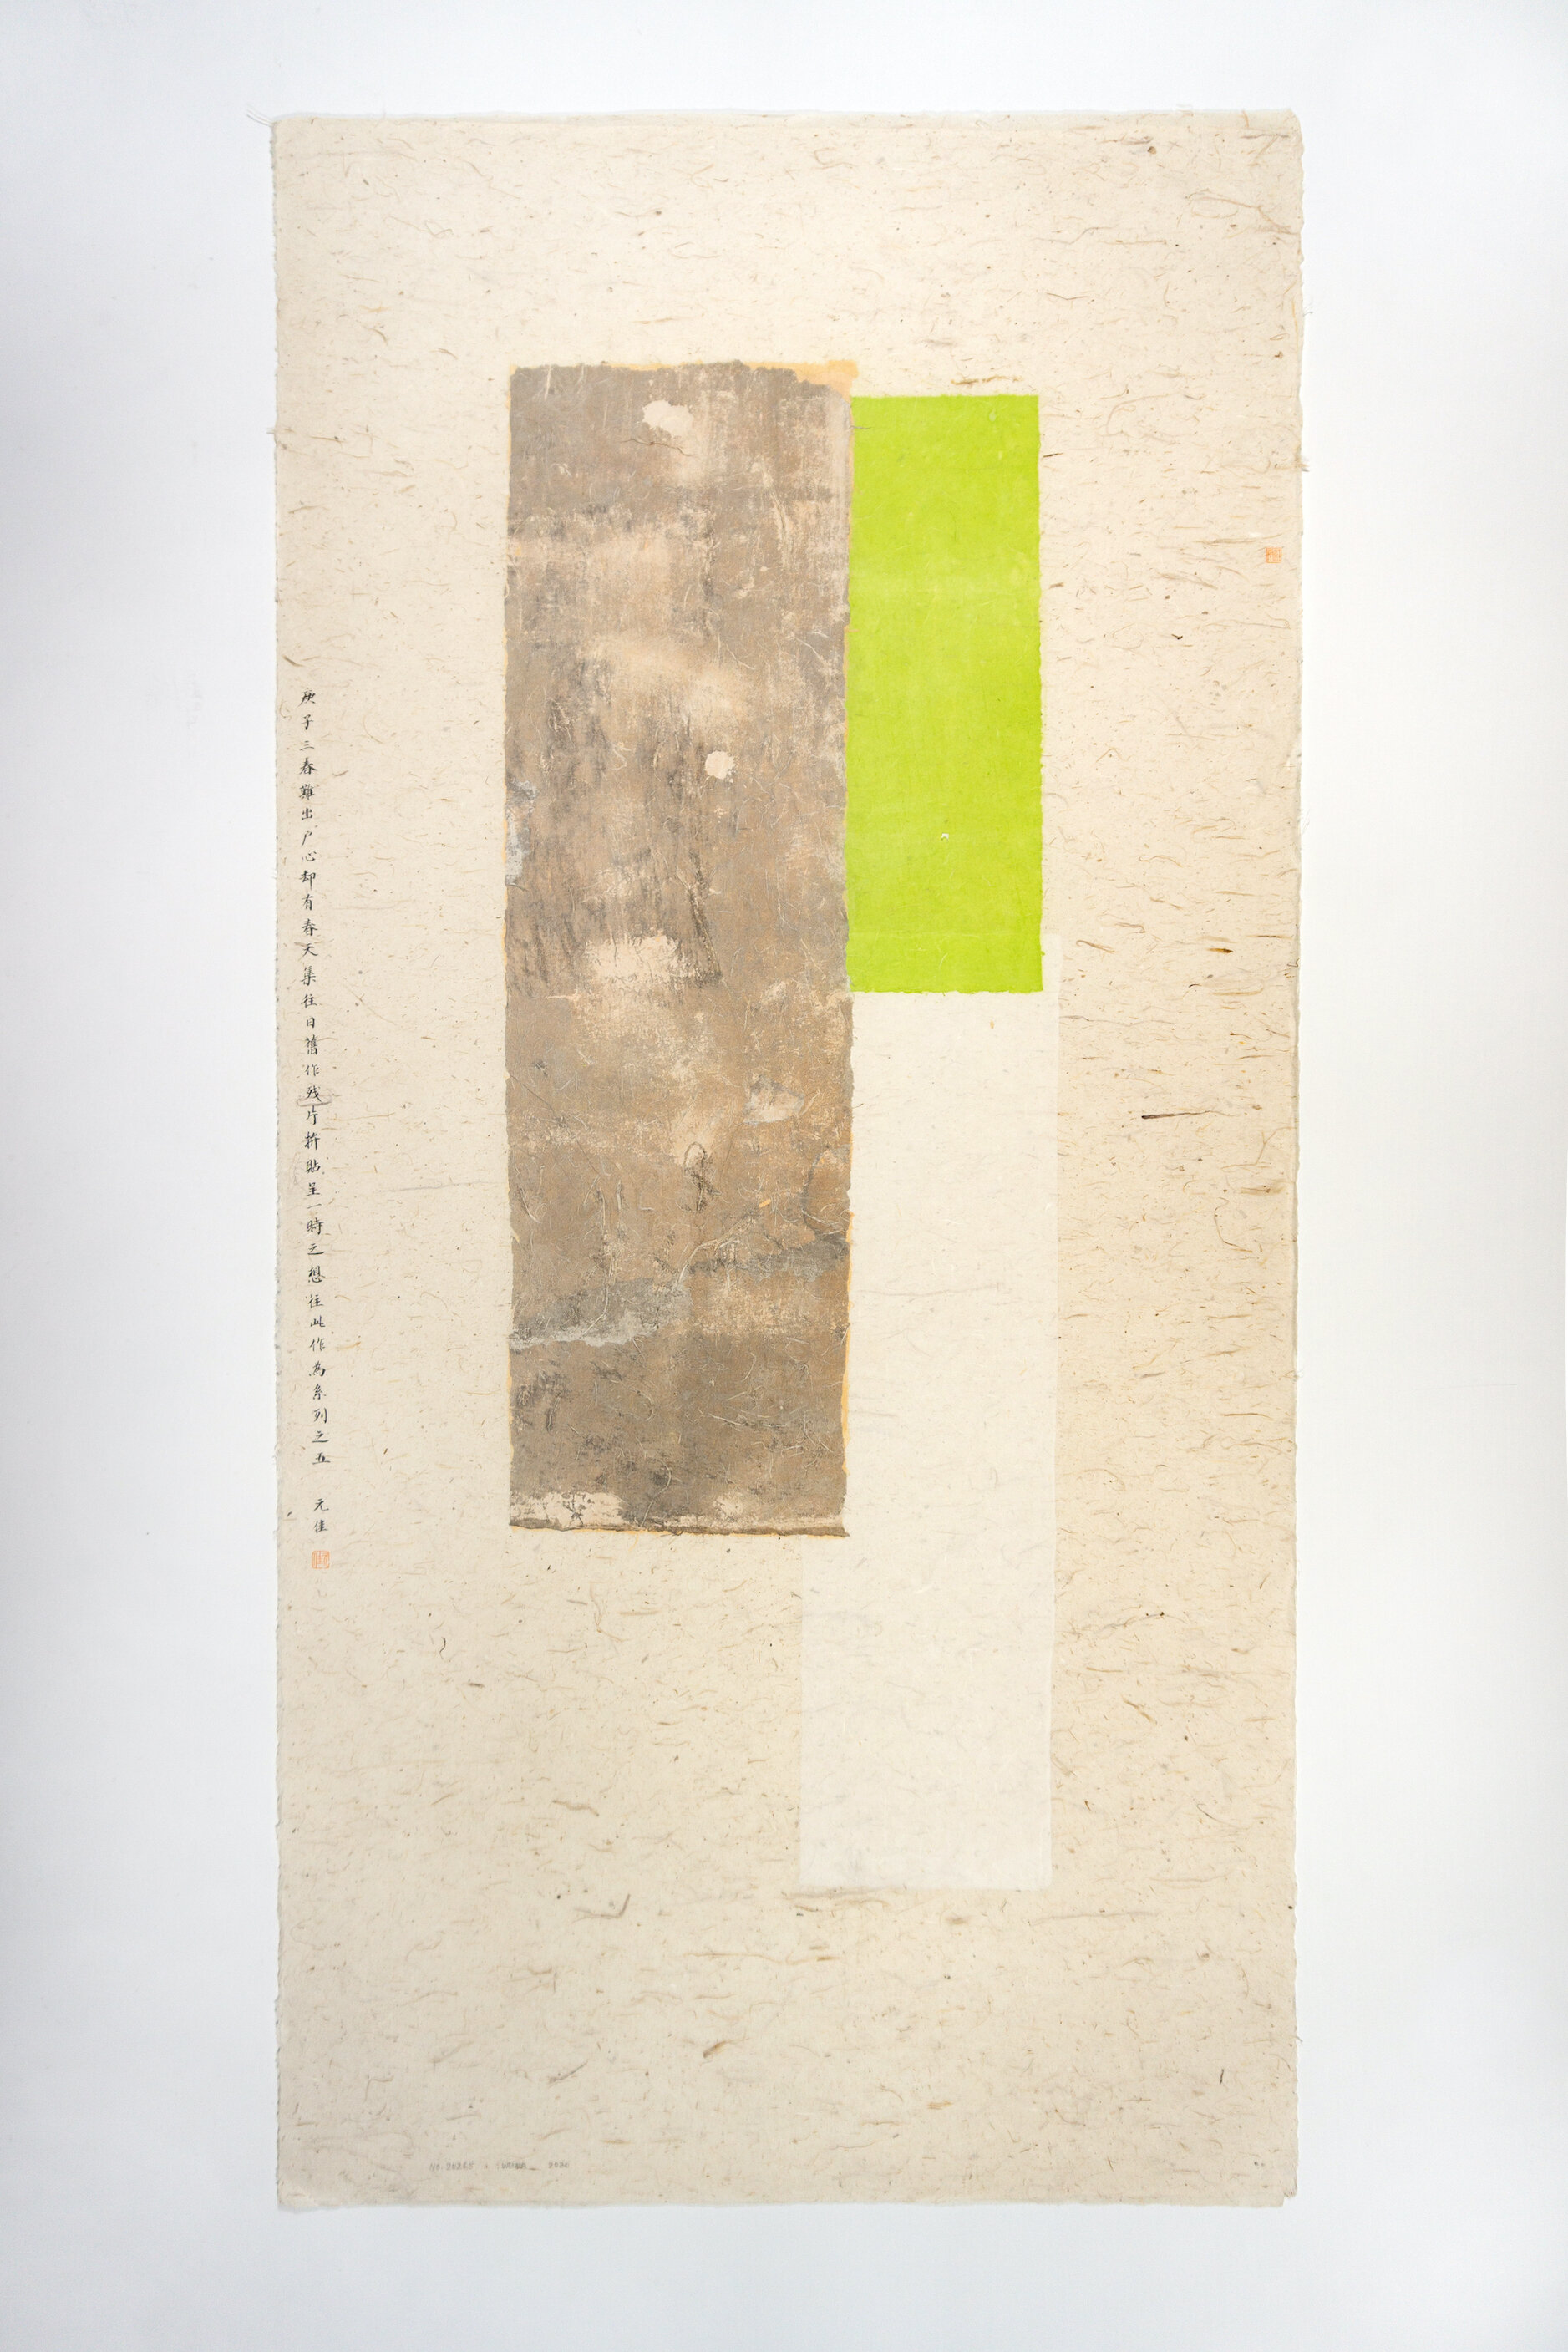  Wei Jia,  No. 20265,  2020. Gouache, ink and Xuan paper, collage on paper, 55 3/4 x 27 1/8 inches ©Wei Jia, courtesy Fou Gallery 